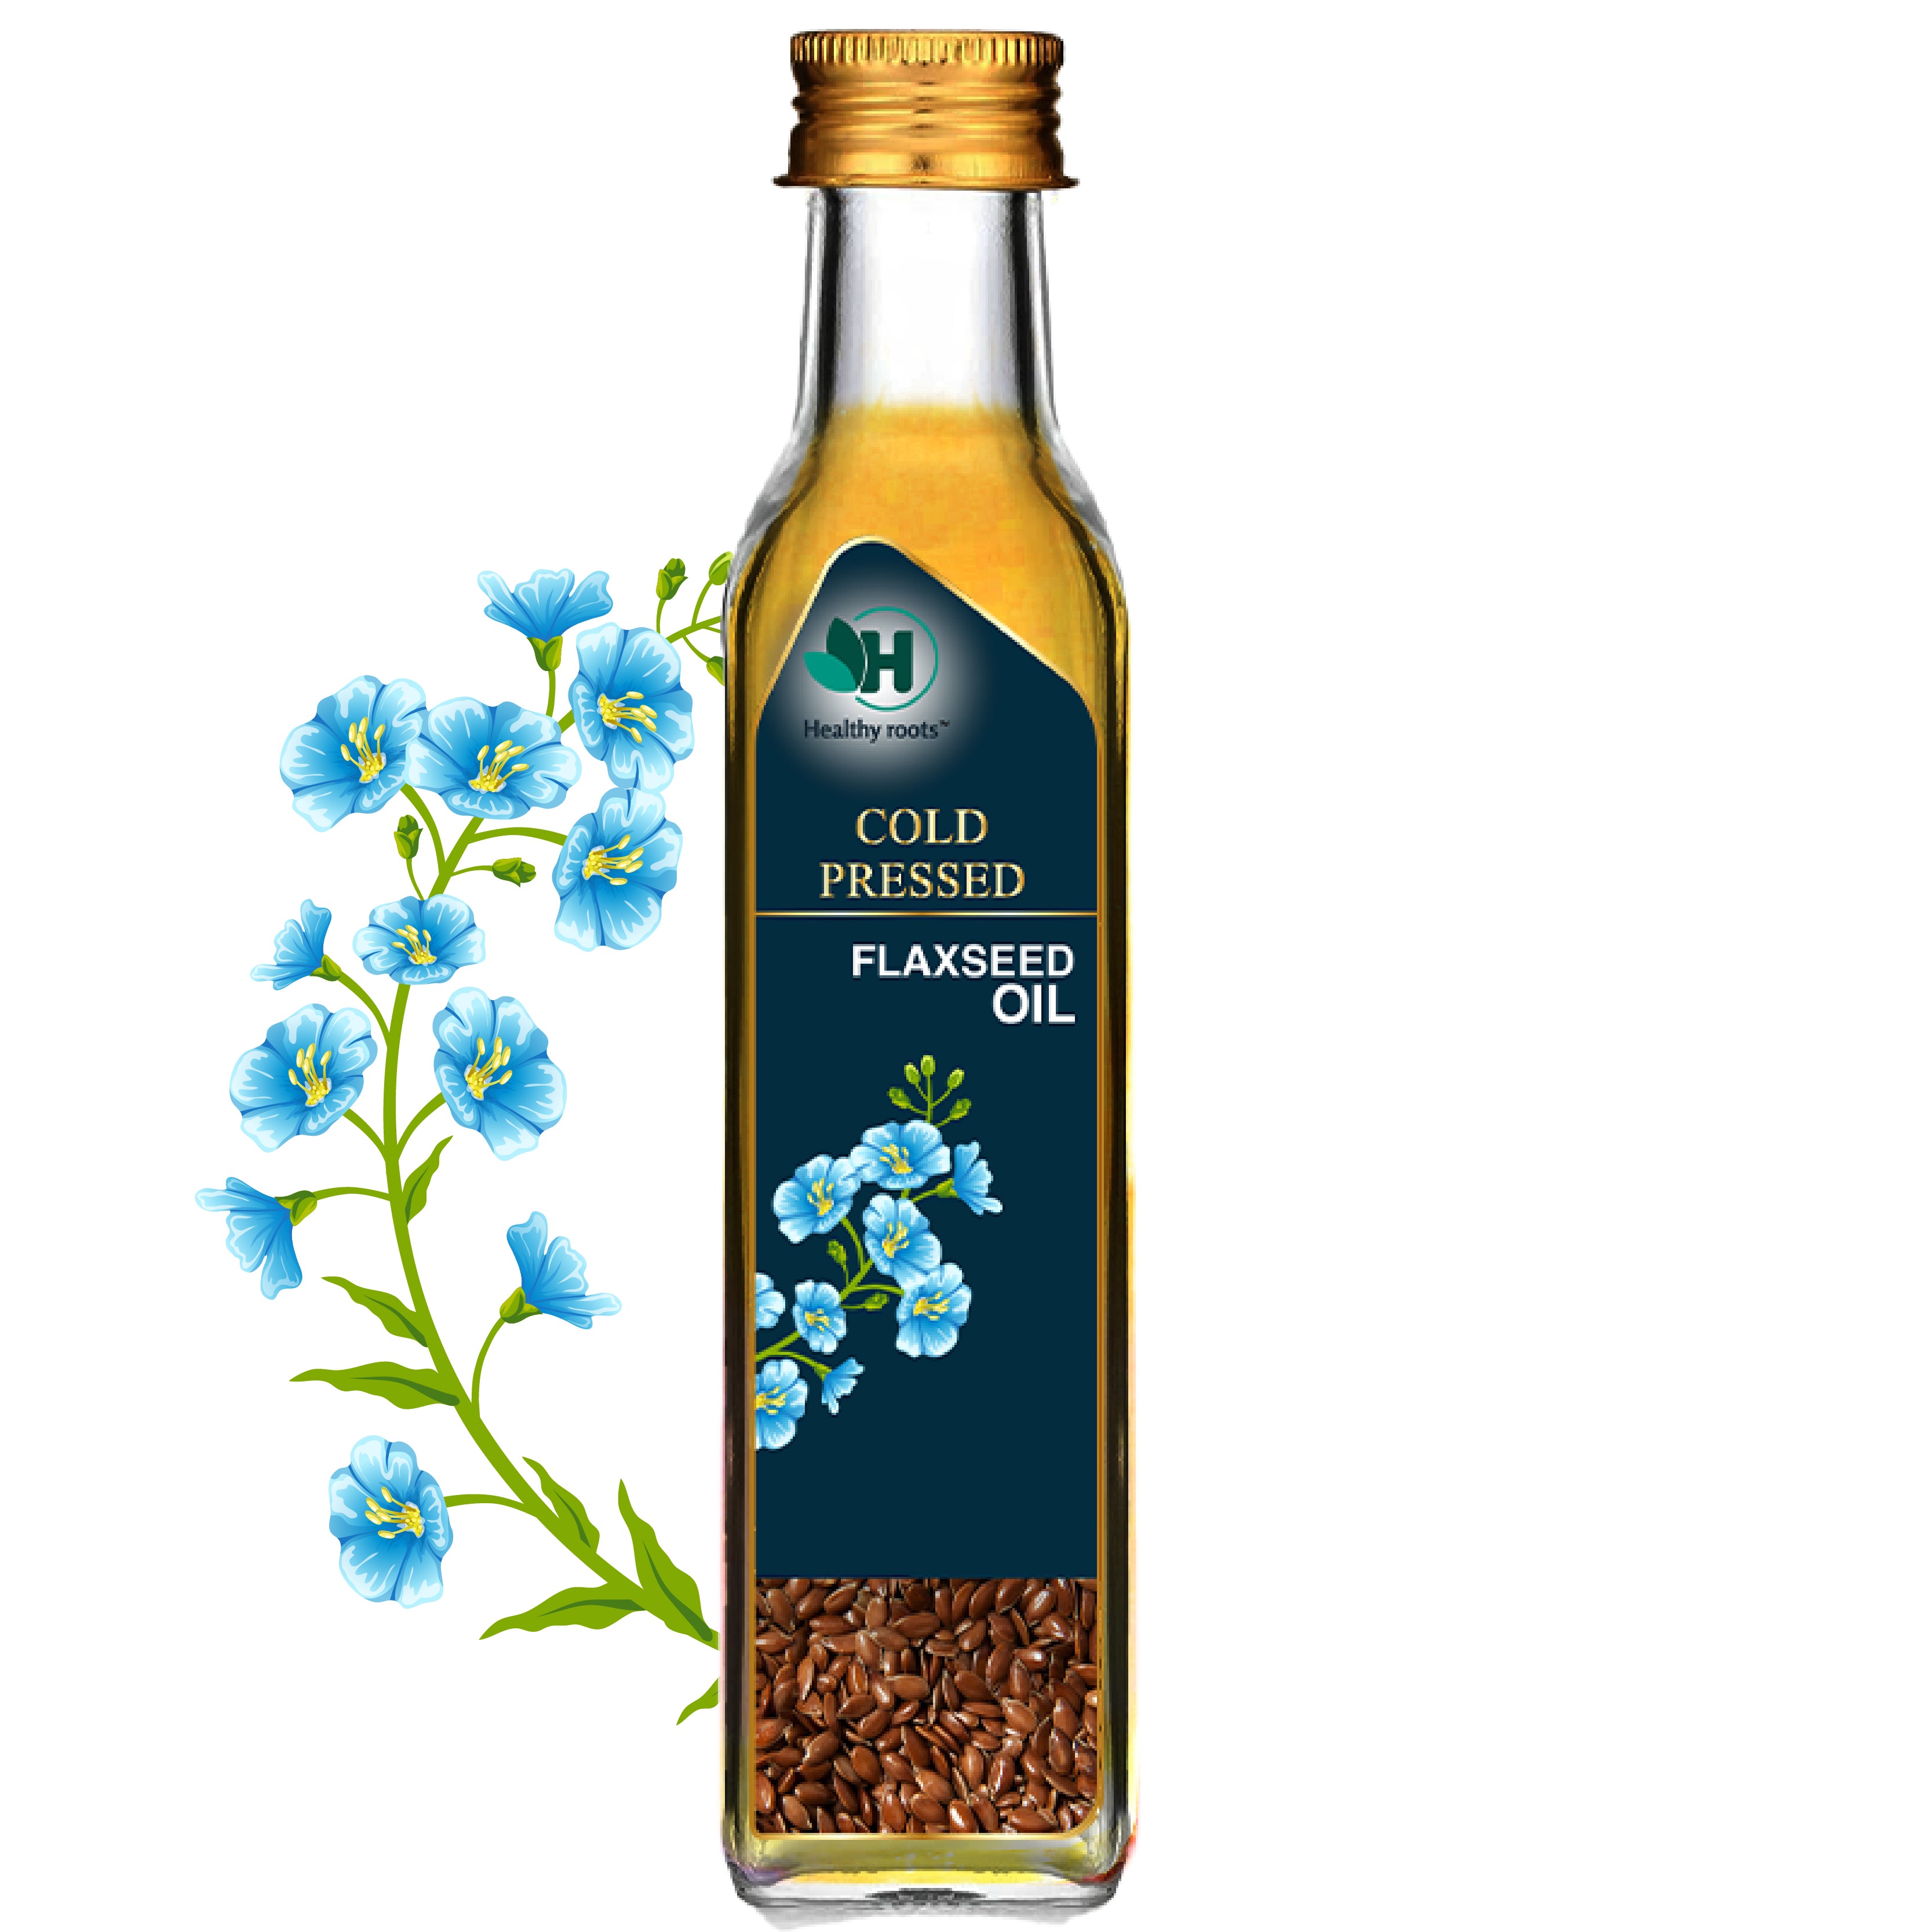 100% Naturally Cold Pressed Flaxseed Oil